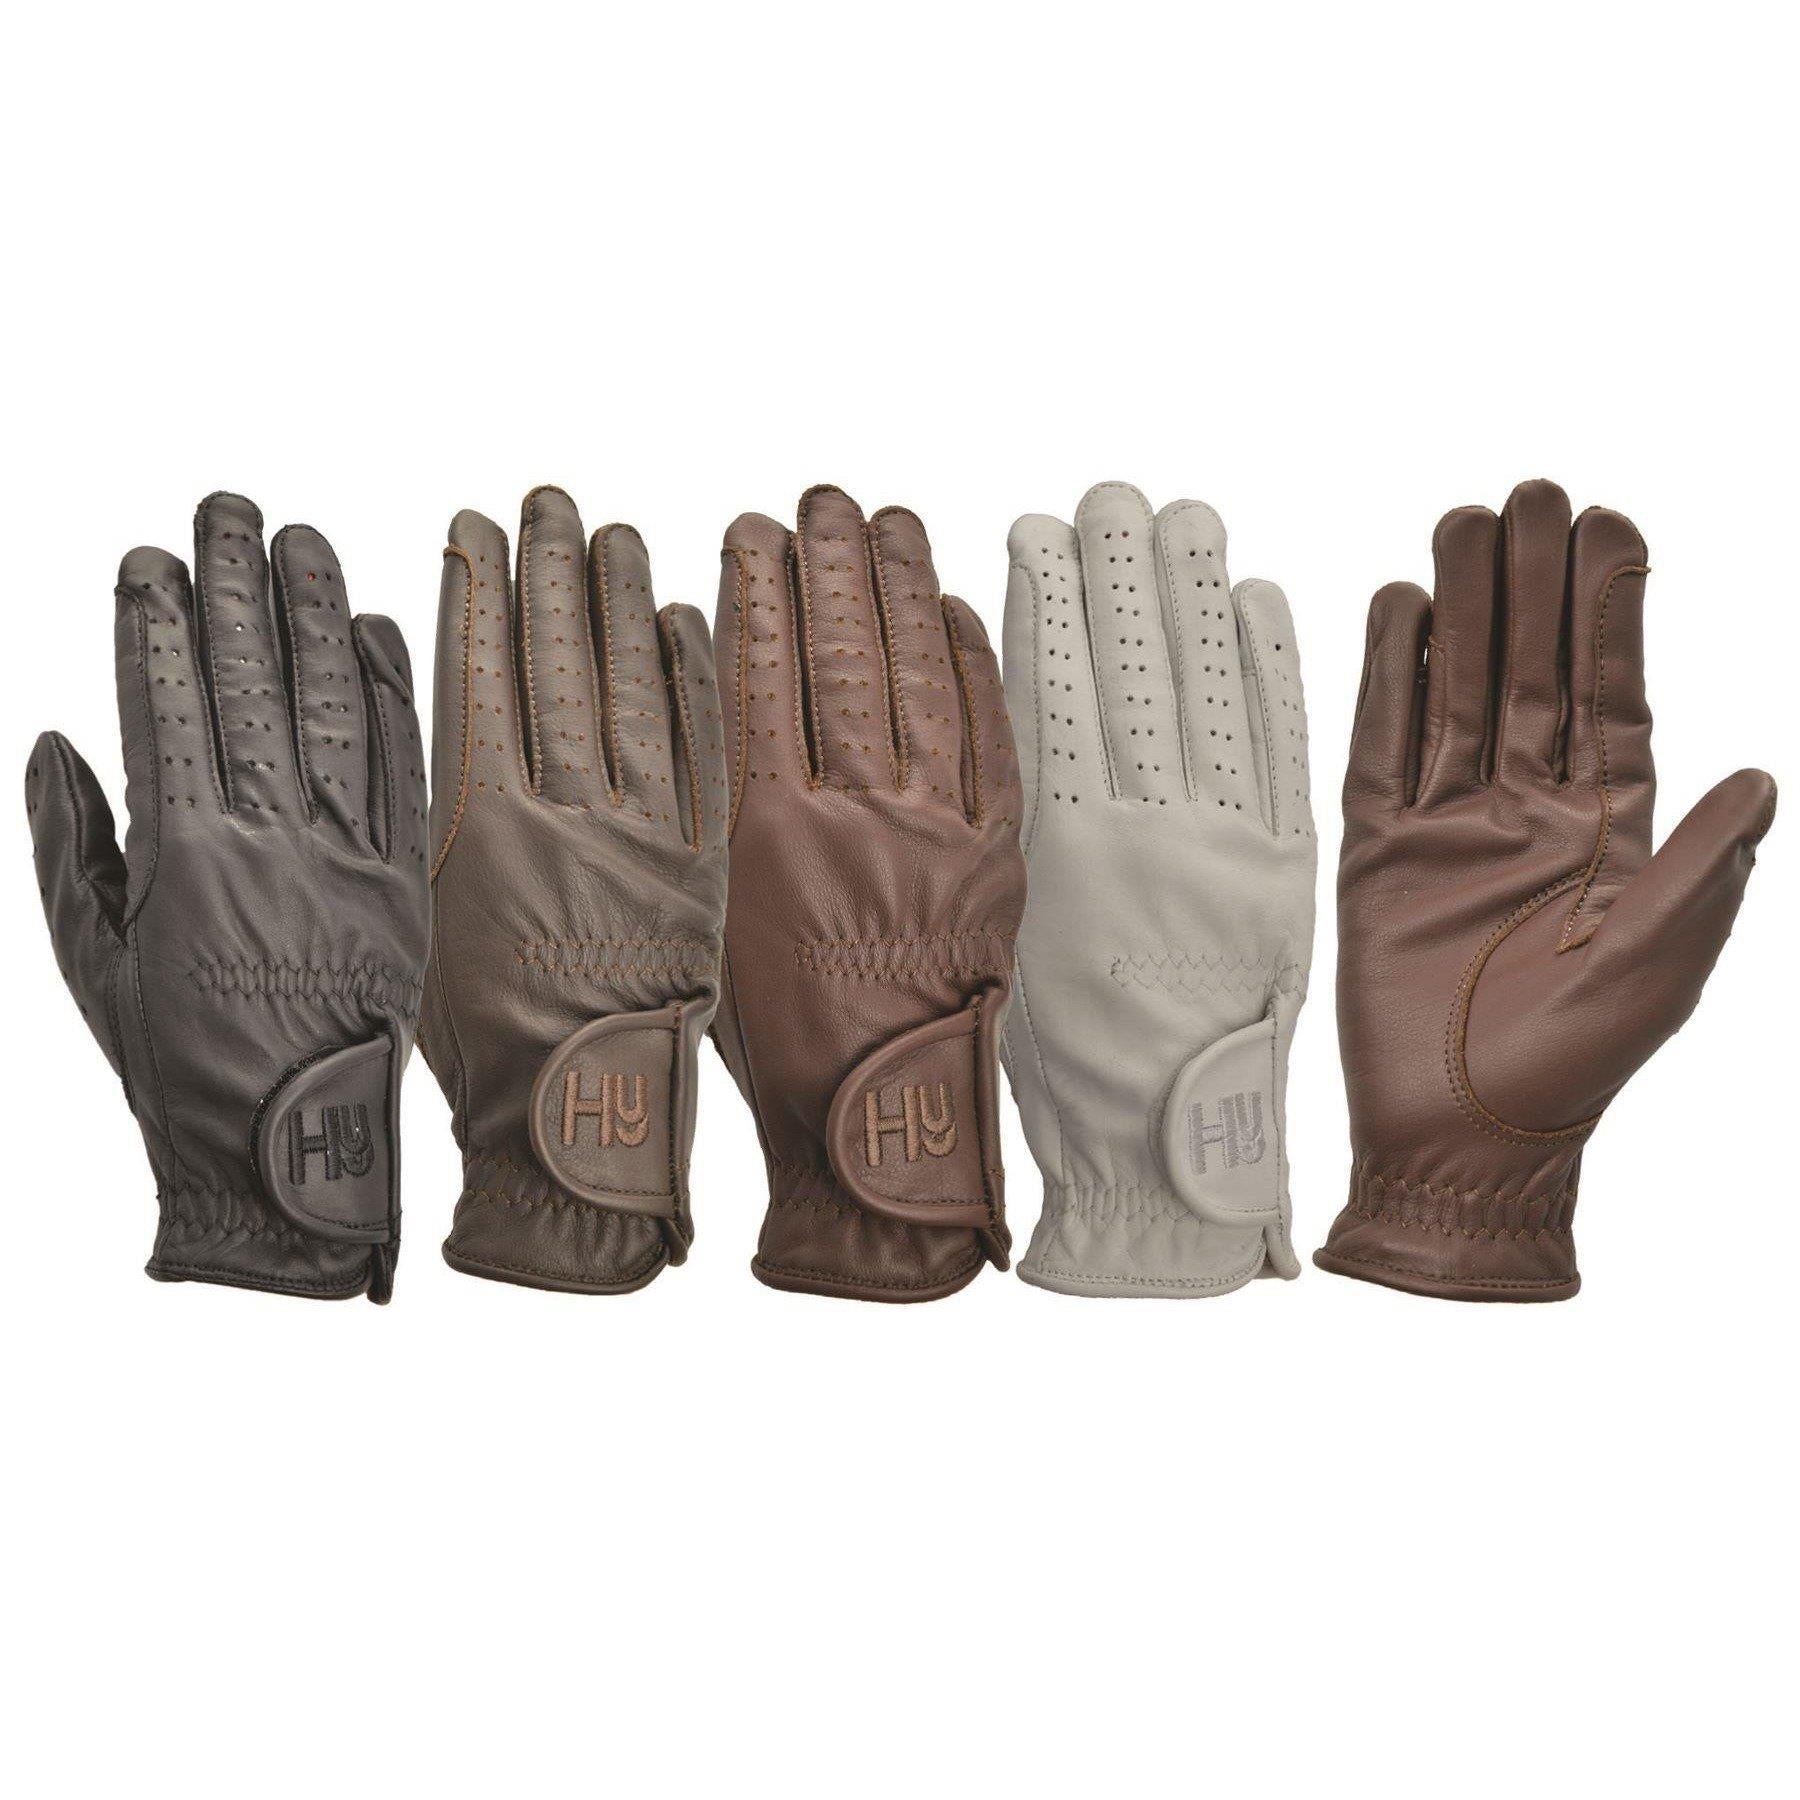 Hy5 Childrens Leather Riding Gloves - Just Horse Riders